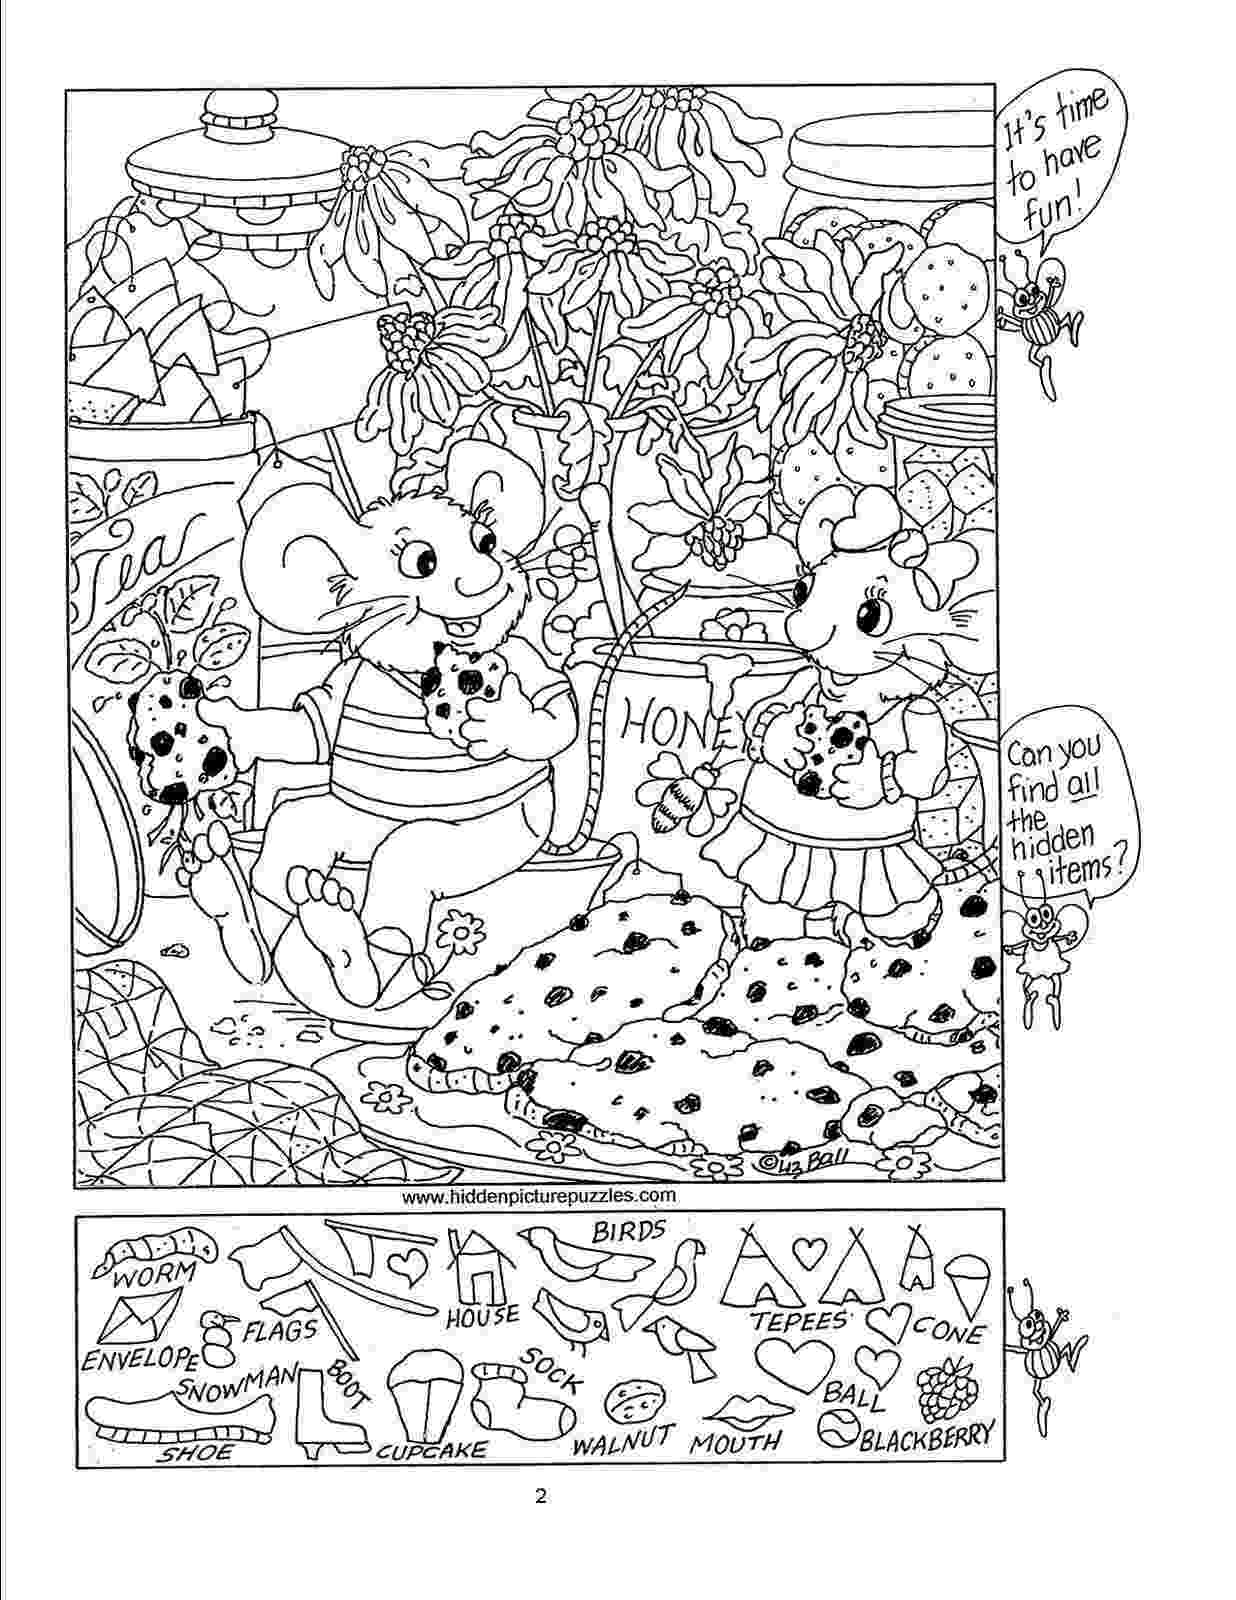 puzzles find the hidden objects hidden picture puzzles coloring pages hidden picture hidden objects puzzles the find 